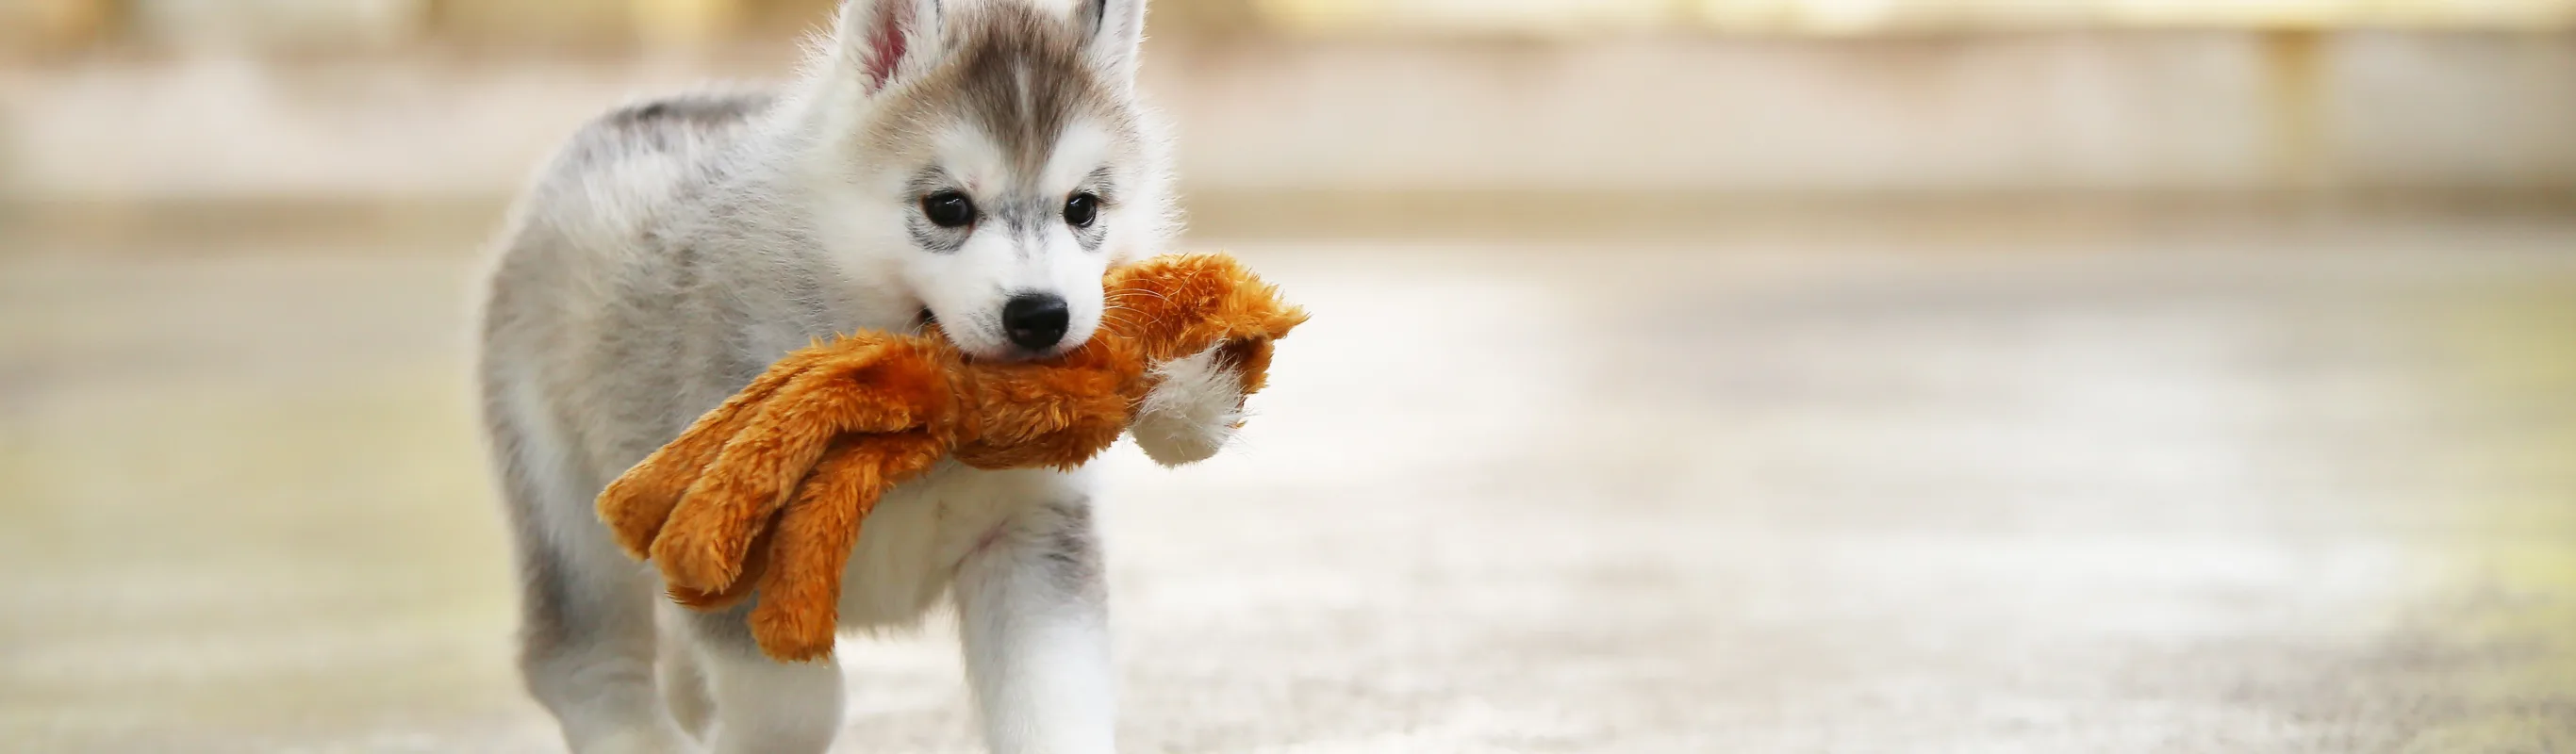 puppy husky running with a toy in its mouth